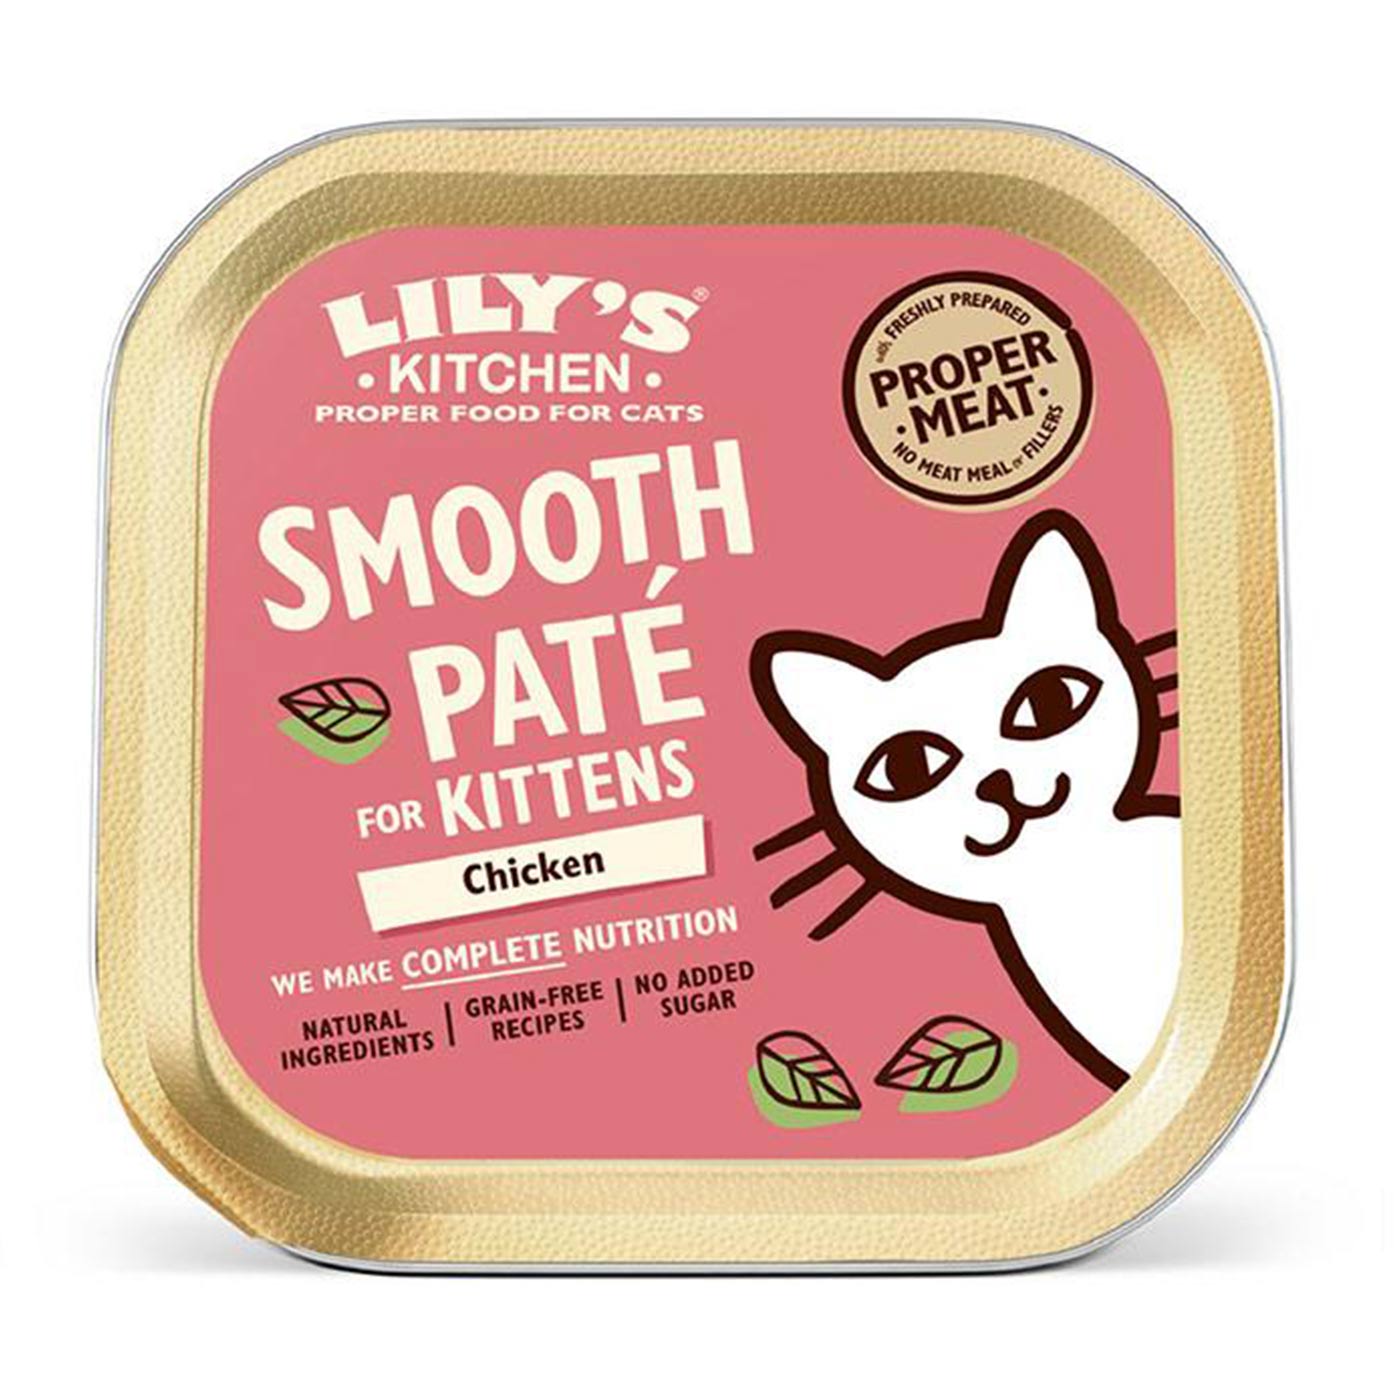 Lily's Kitchen Chicken Paté for Kittens